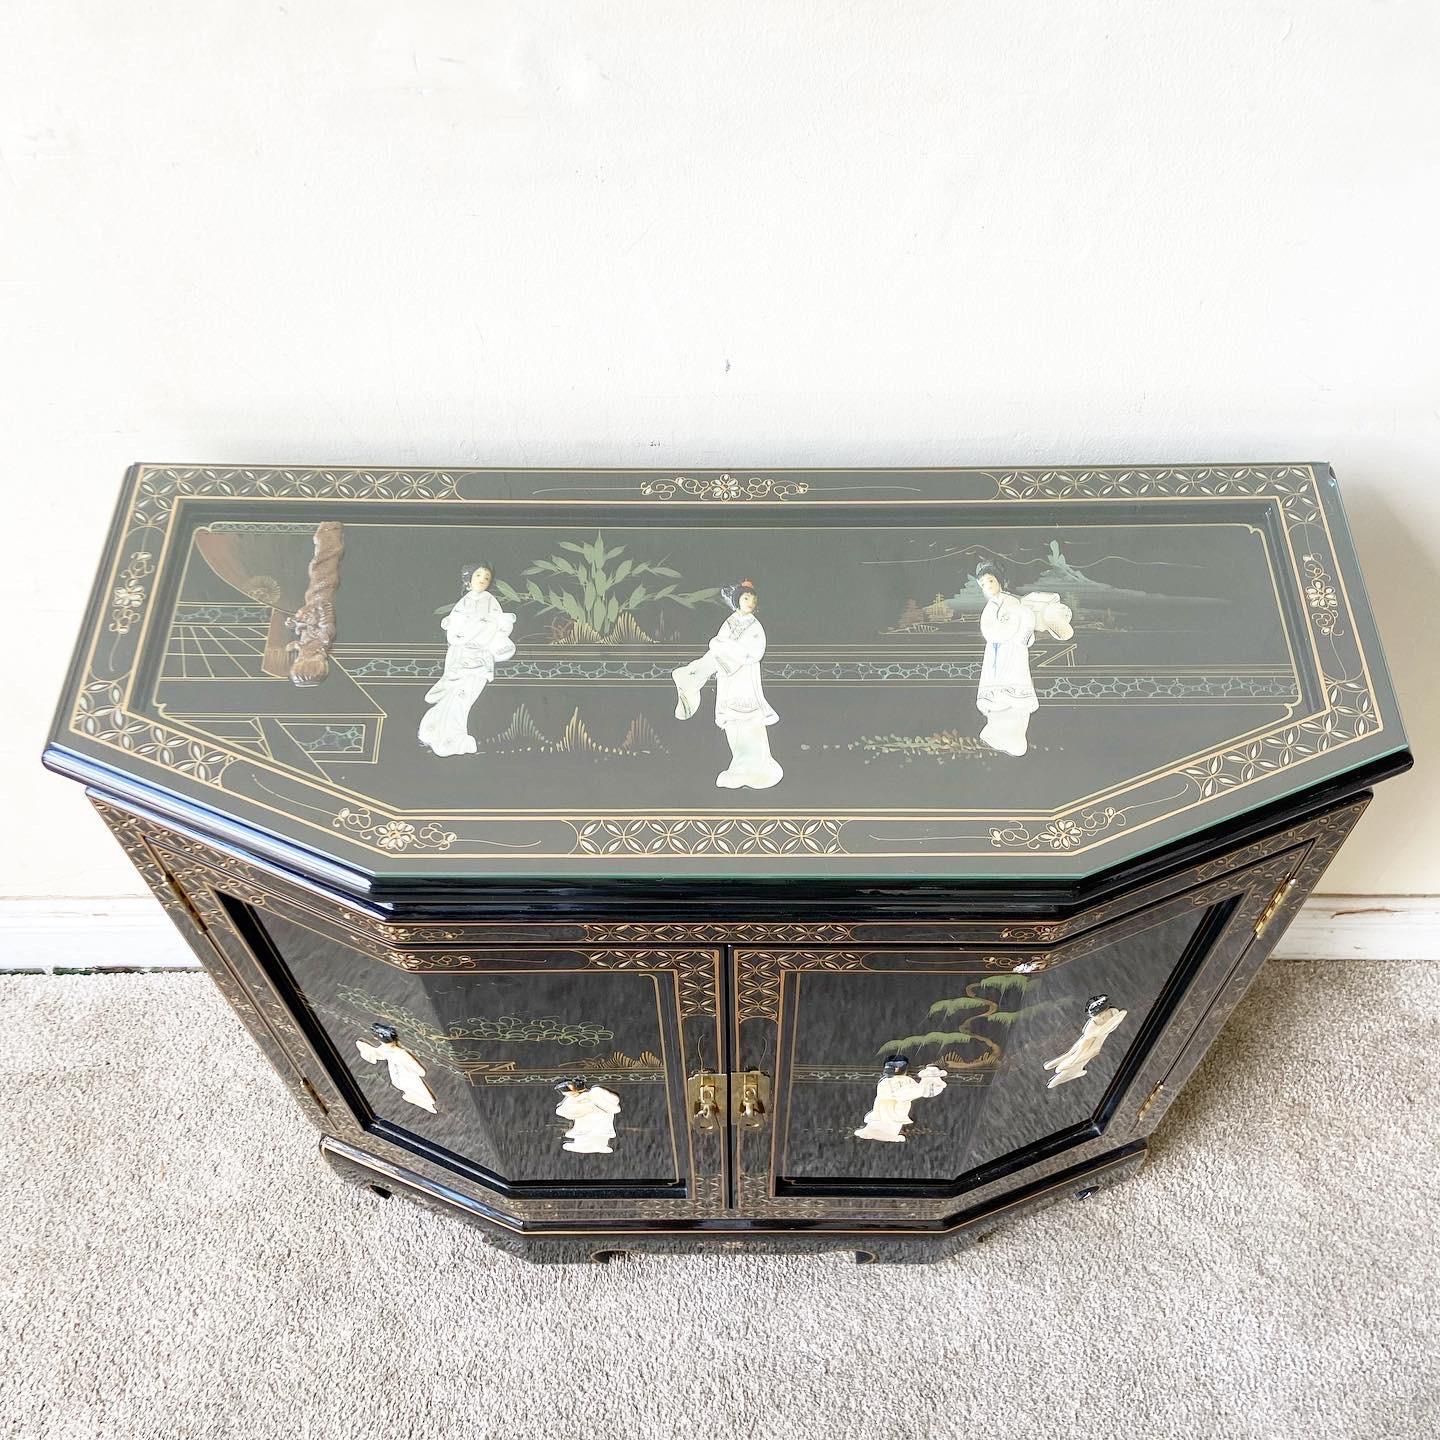 Excellent Chinese black lacquered small credenza/sideboard. Features a mother of painted with mother of pearl depiction of Chinese situations.
 